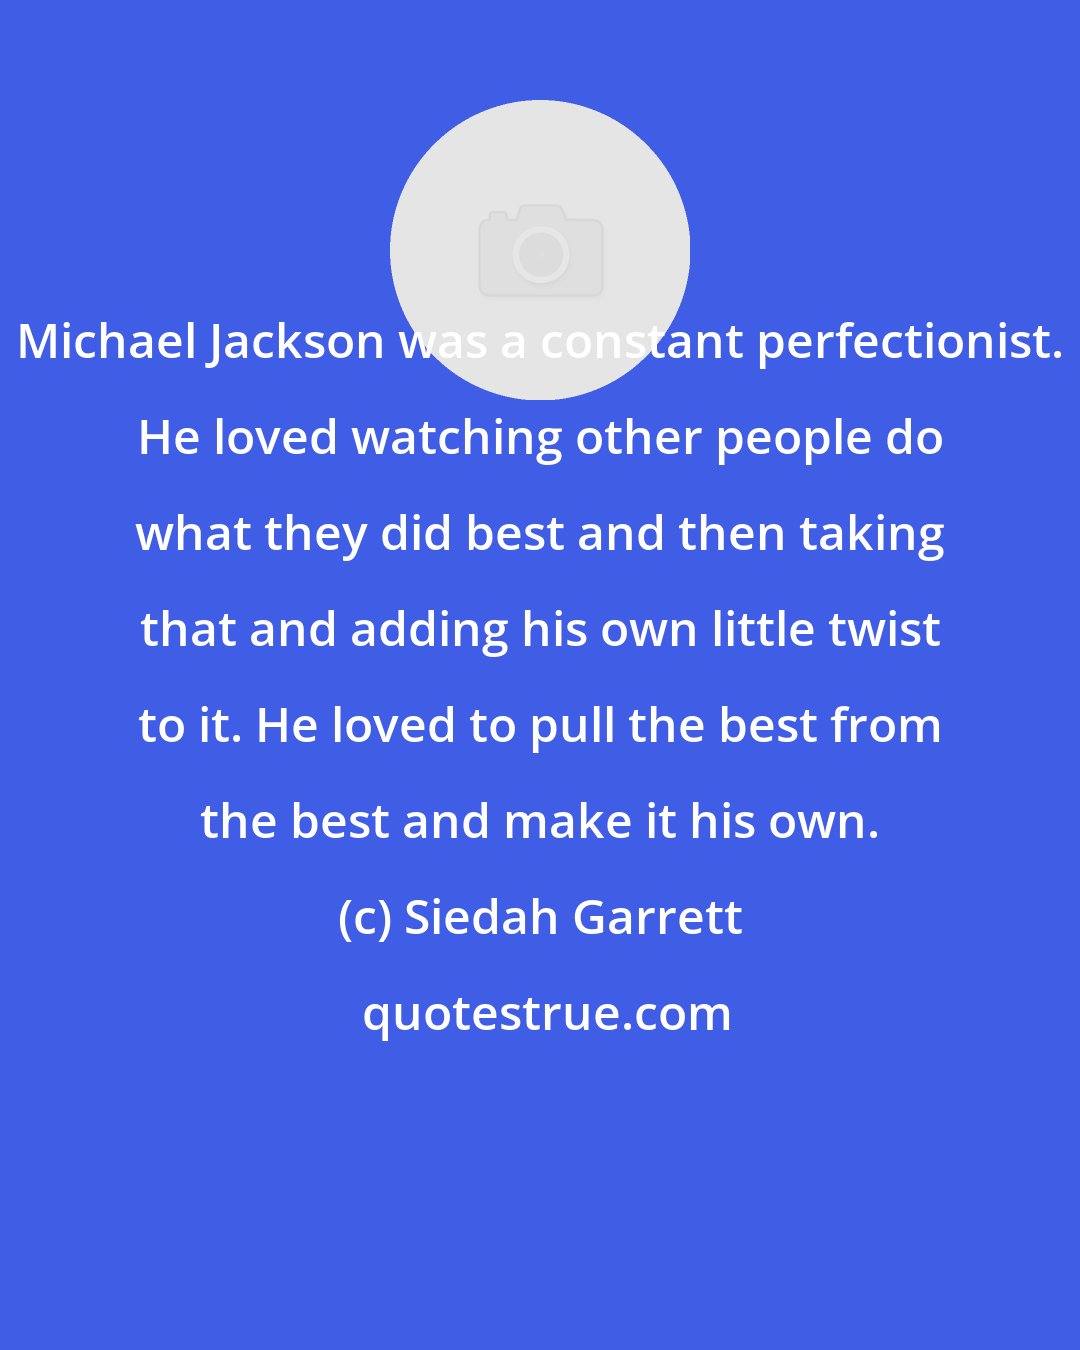 Siedah Garrett: Michael Jackson was a constant perfectionist. He loved watching other people do what they did best and then taking that and adding his own little twist to it. He loved to pull the best from the best and make it his own.